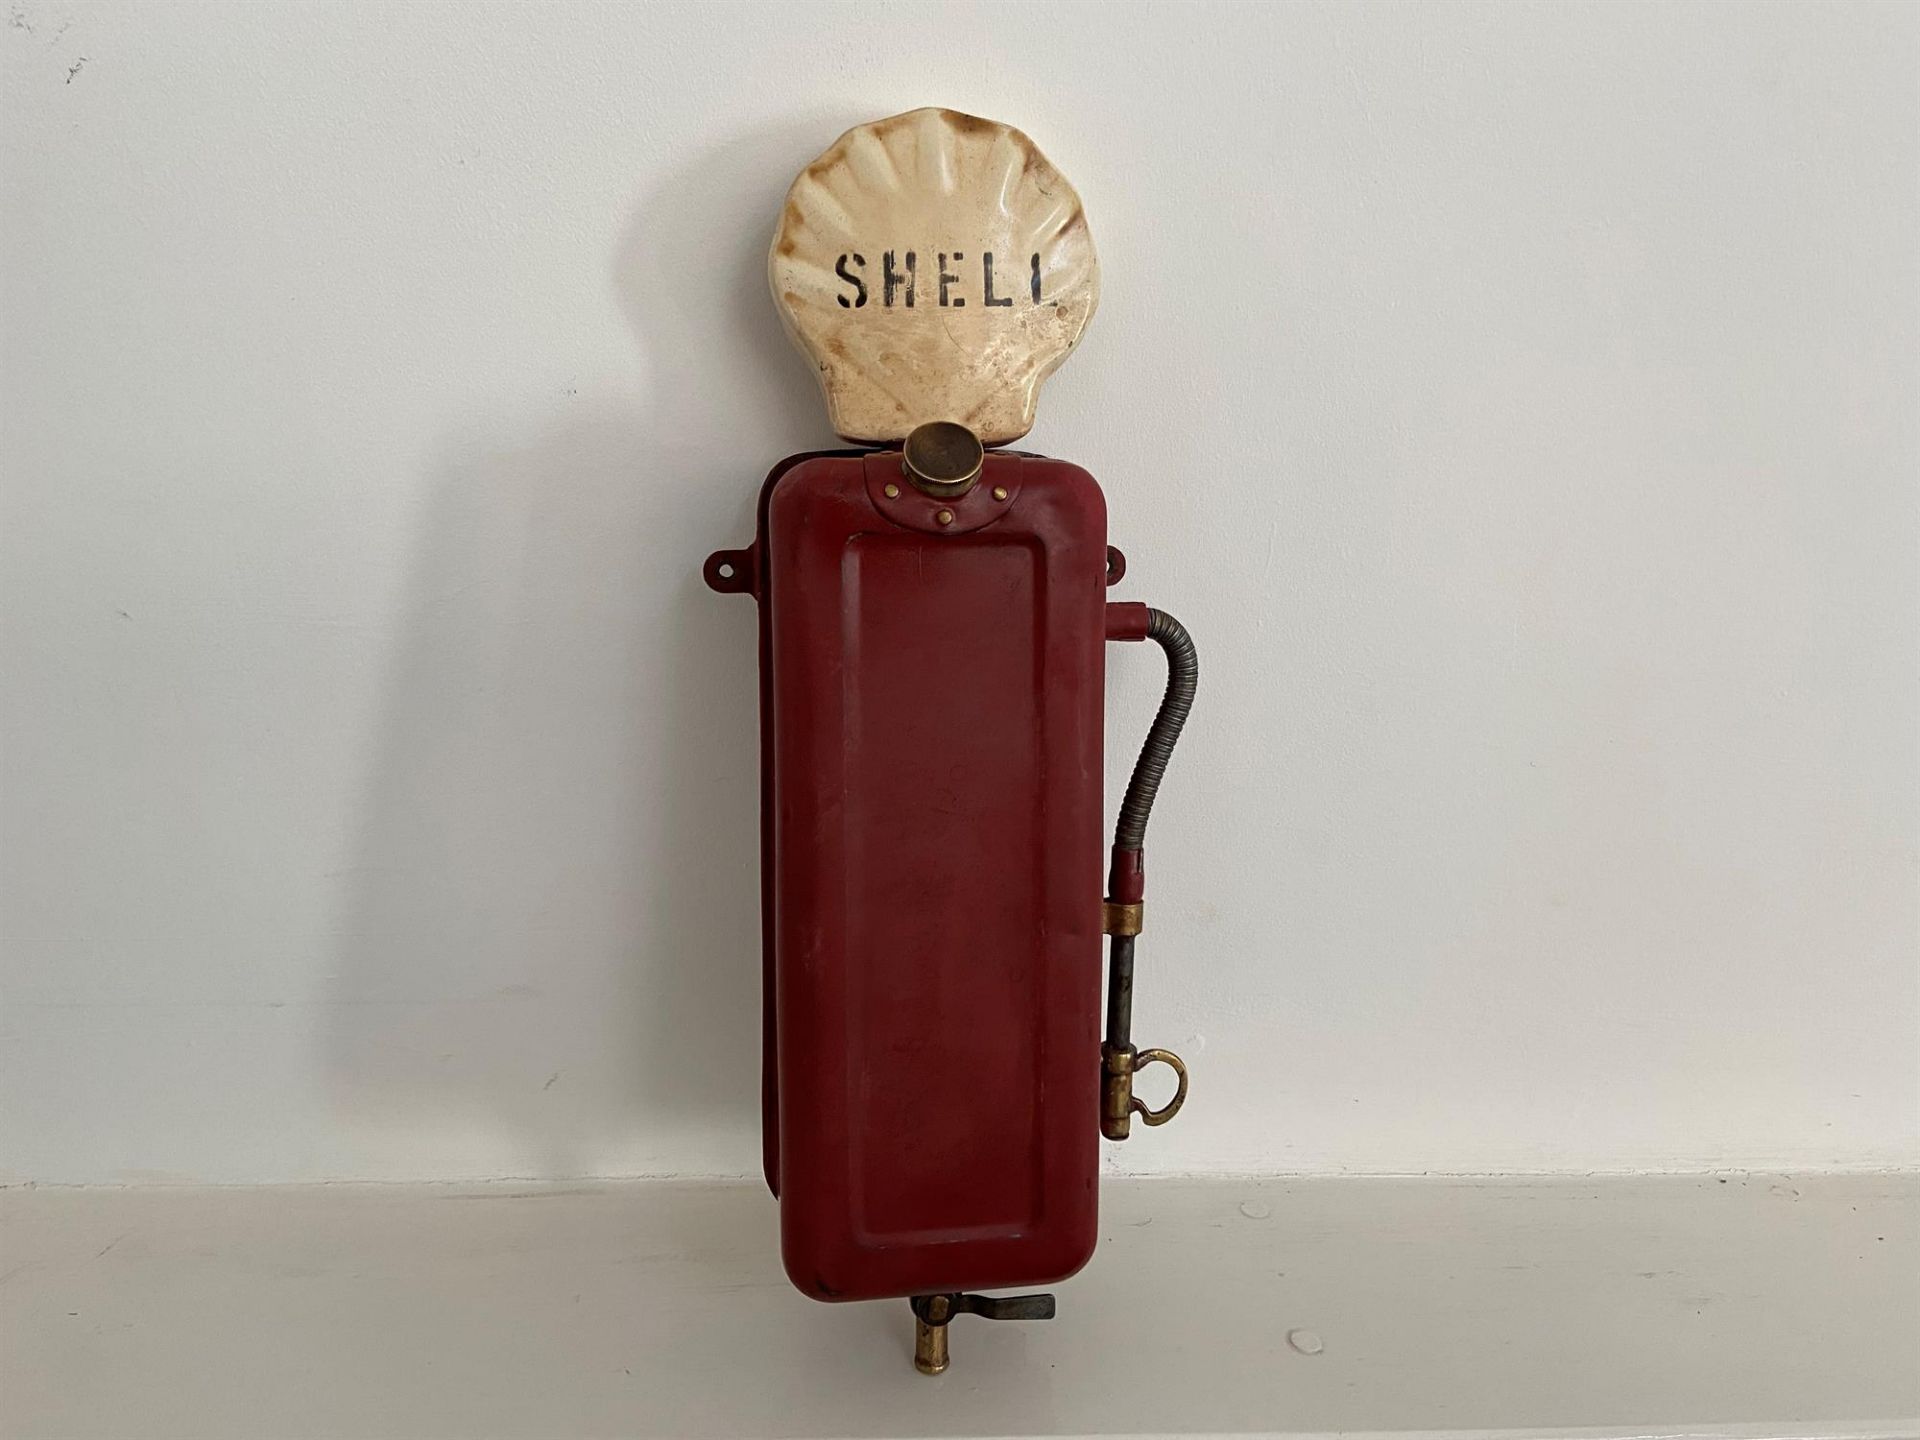 A Novelty Oil/Fuel Container Marked "Shell"